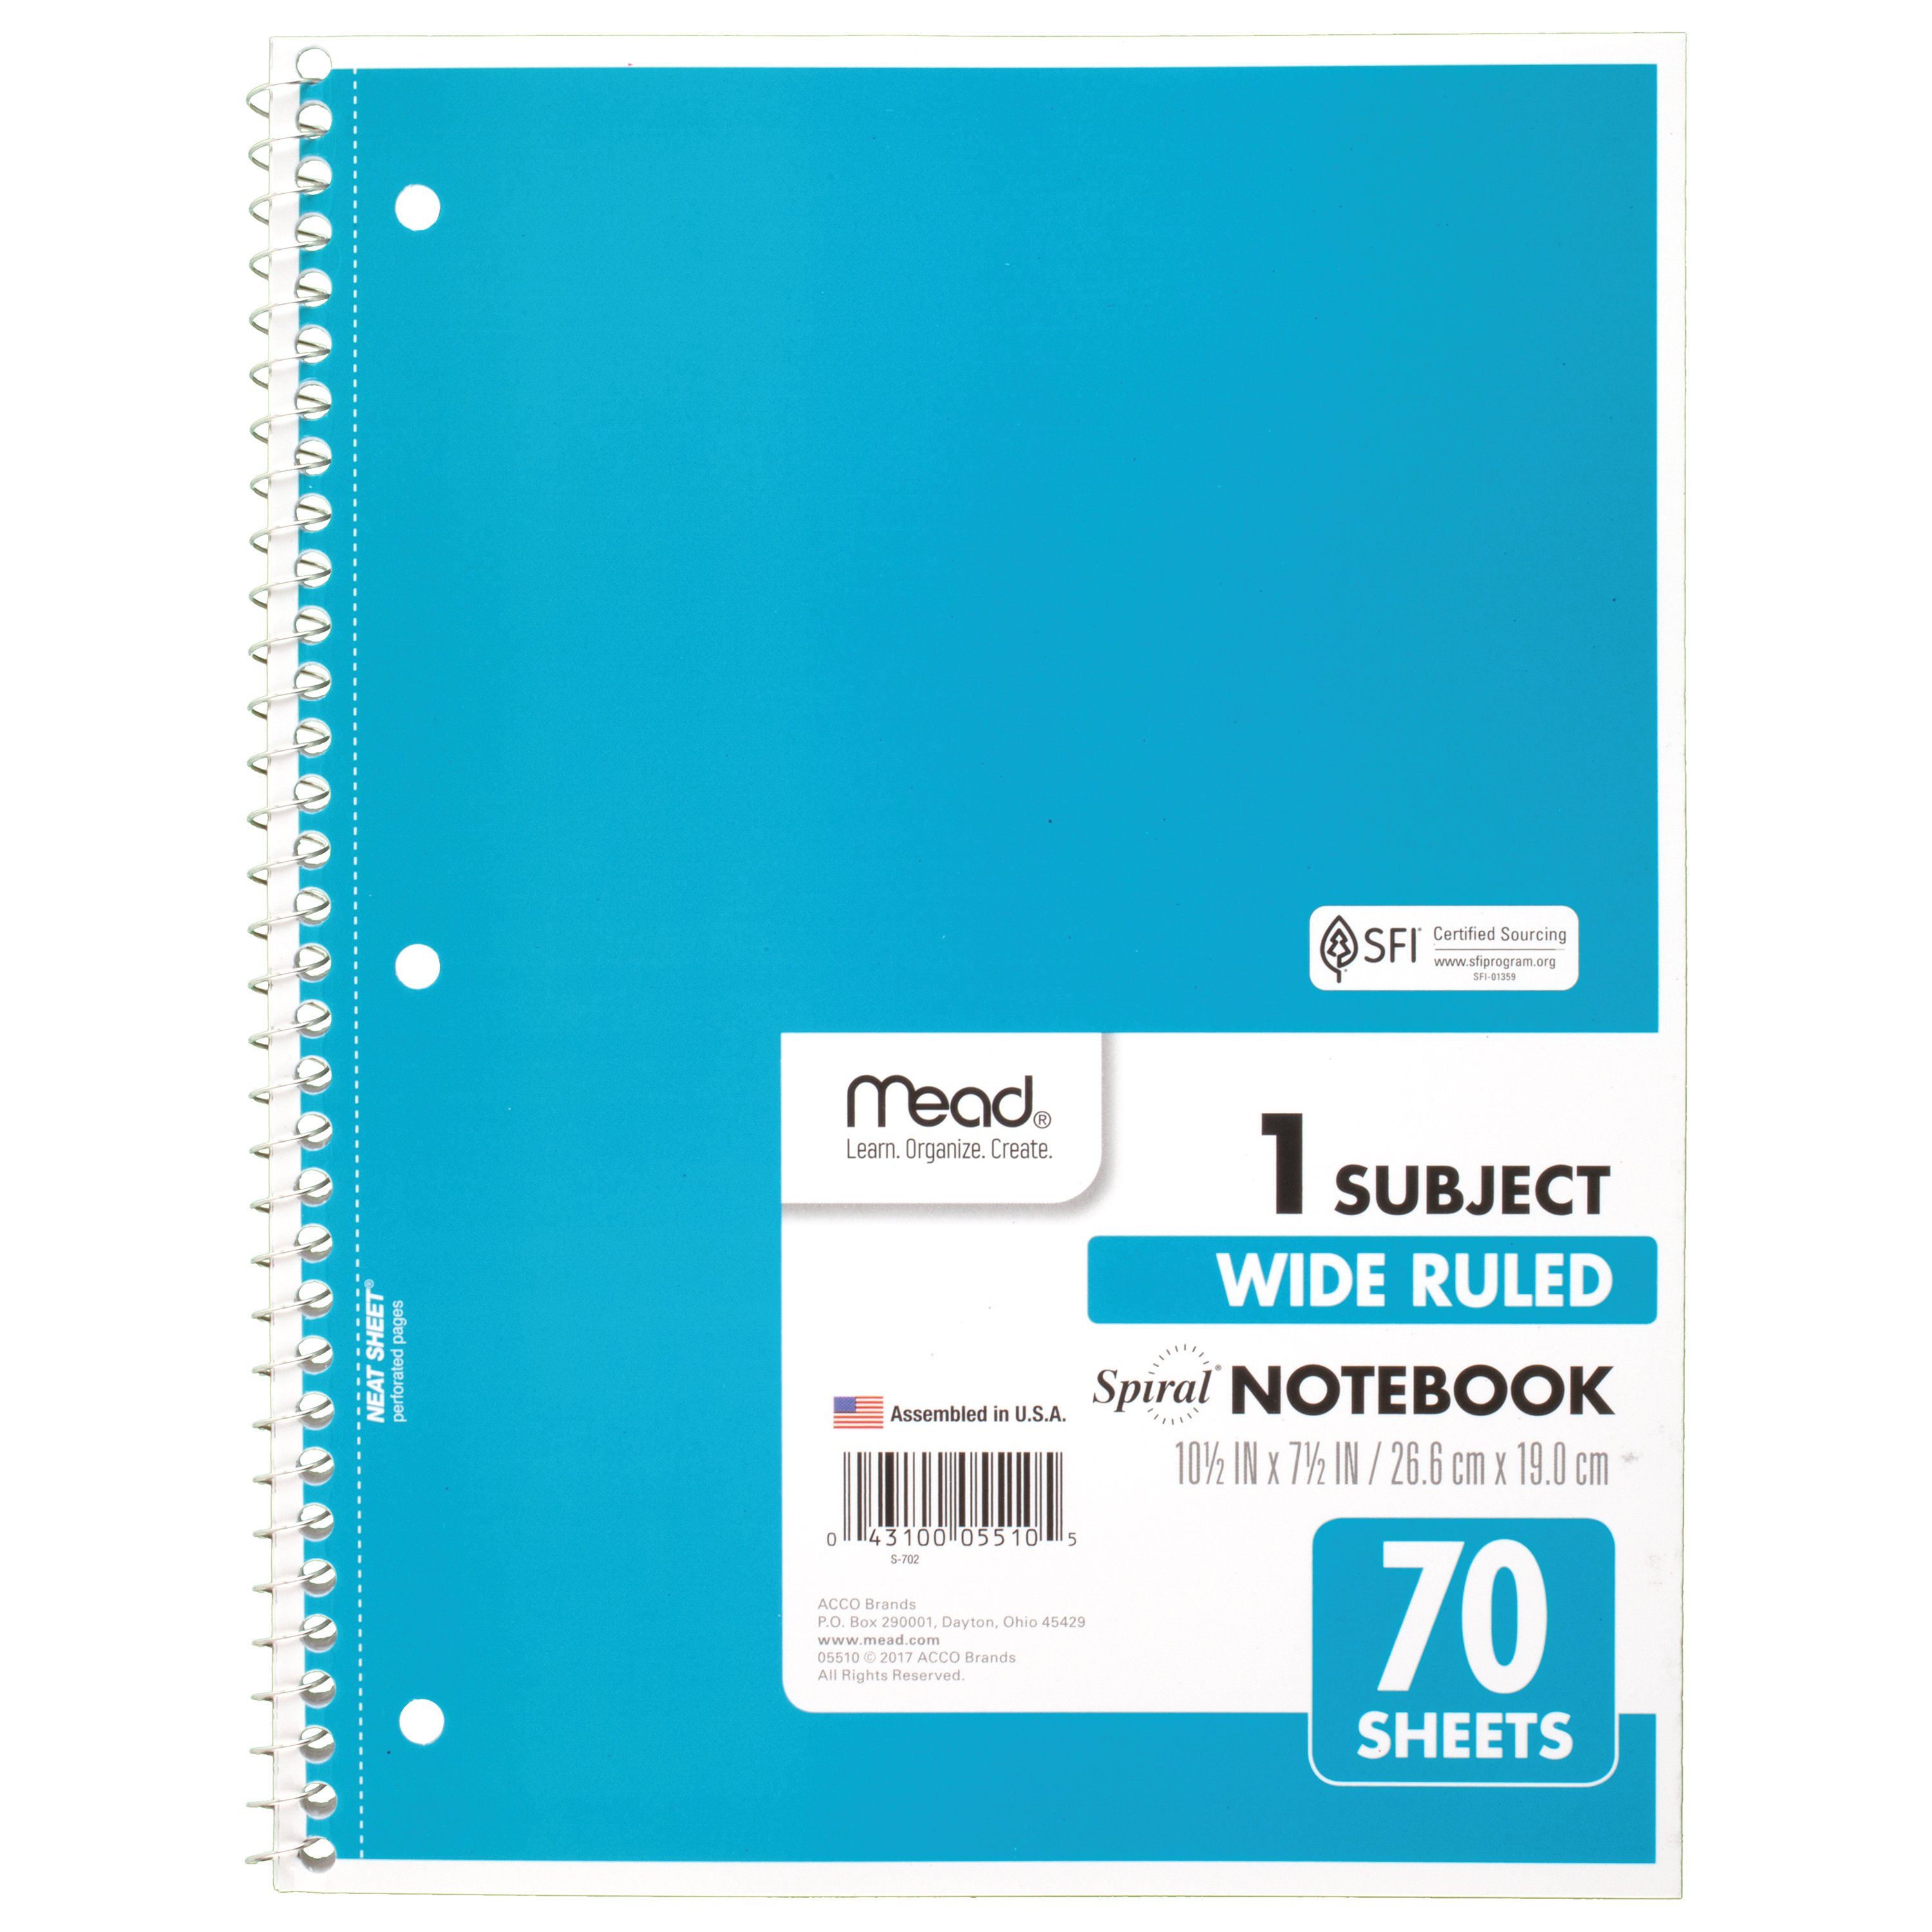 Mead Spiral 1 Subject Wide Ruled Notebook 6 Pack, Assorted Colors (73063) - image 3 of 8